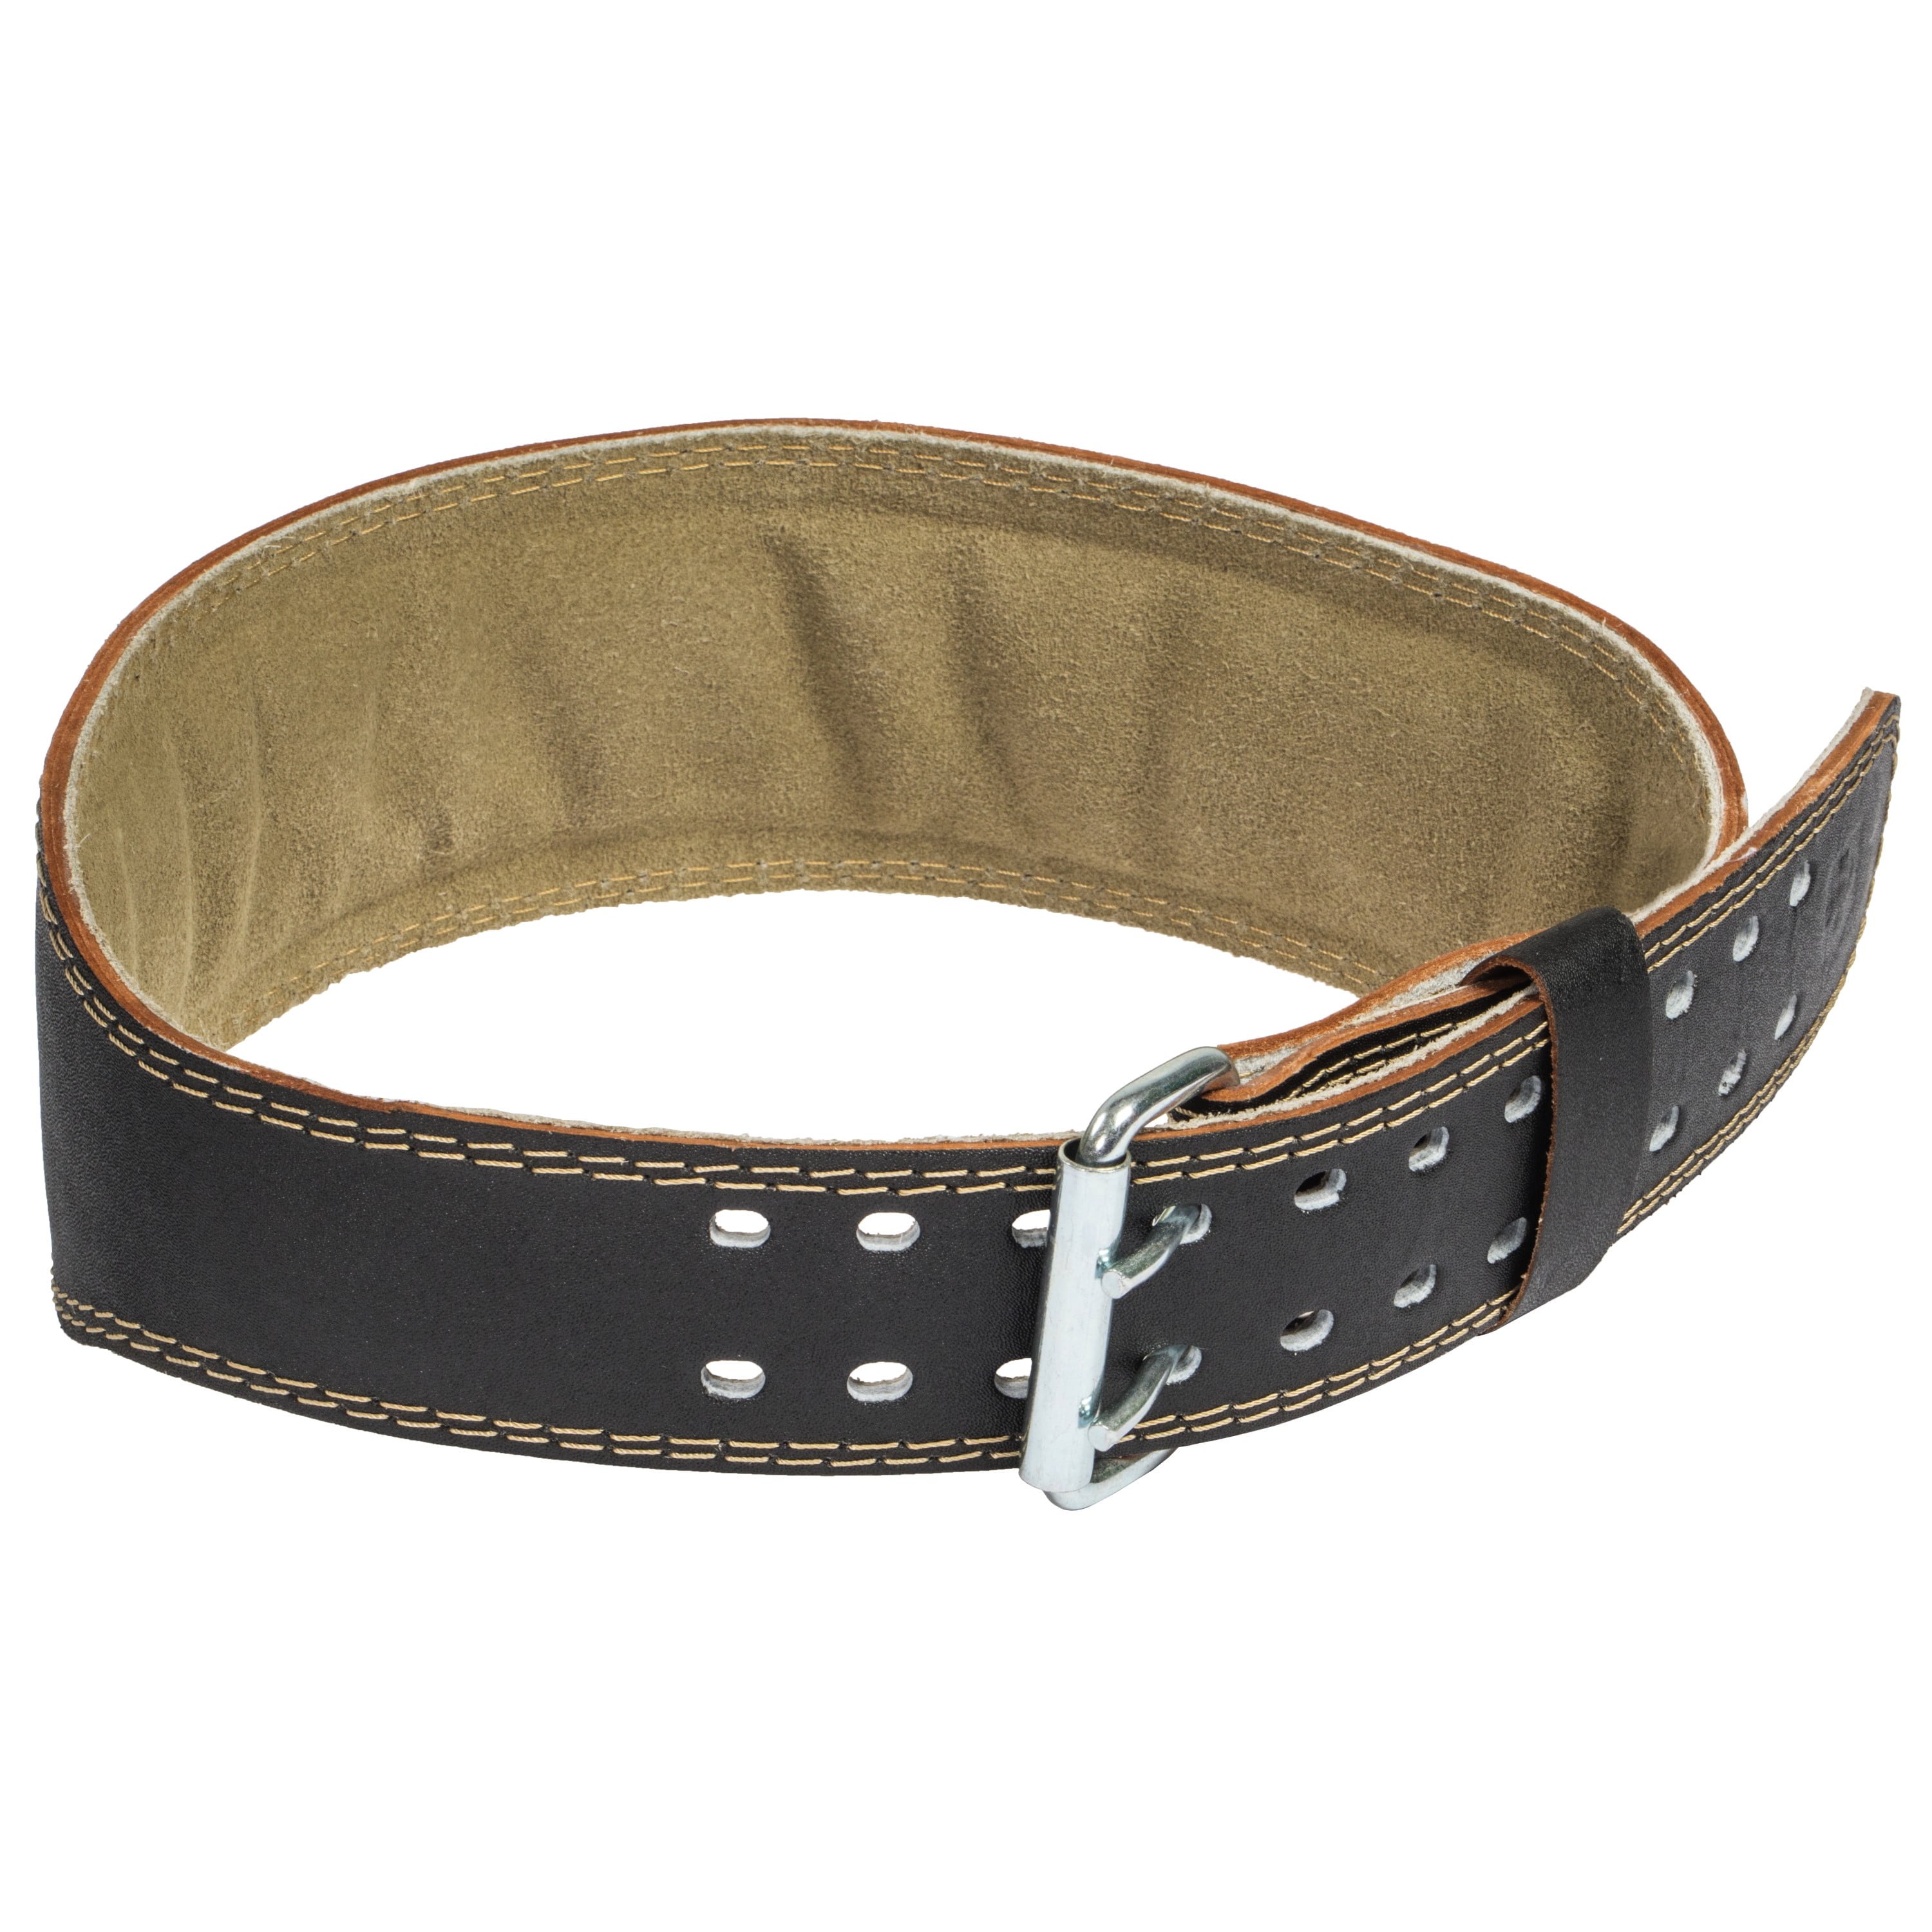 Harbinger Padded Leather Contoured Weightlifting Belt with Suede Lining and Steel Roller Buckle 